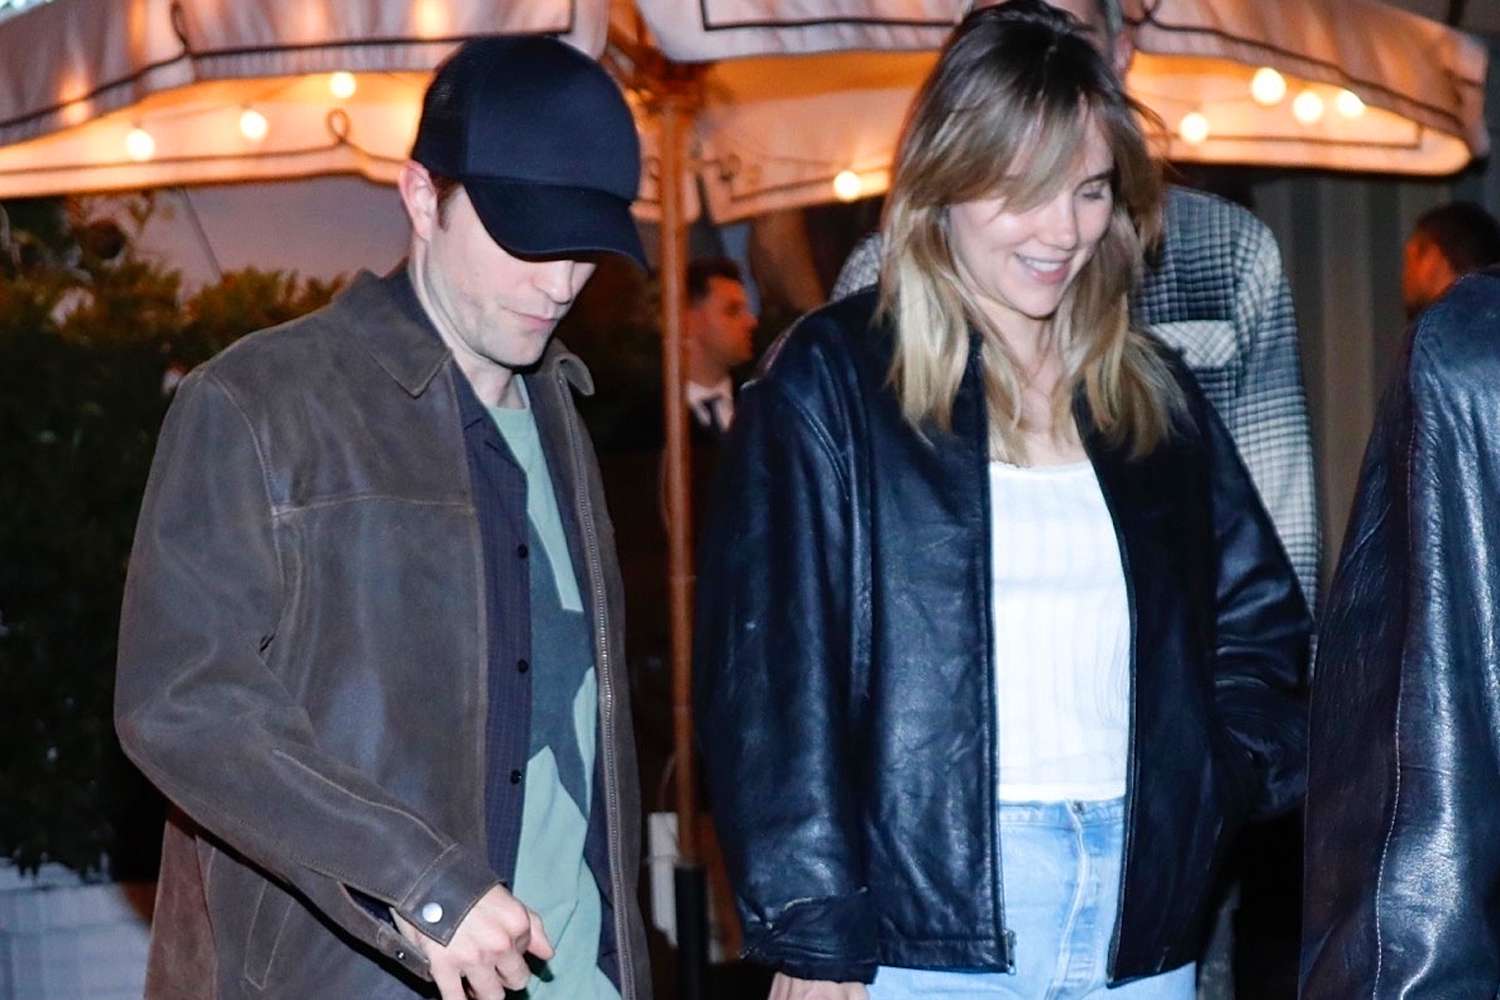 New Parents Robert Pattinson and Suki Waterhouse Spend Date Night Together in L.A.